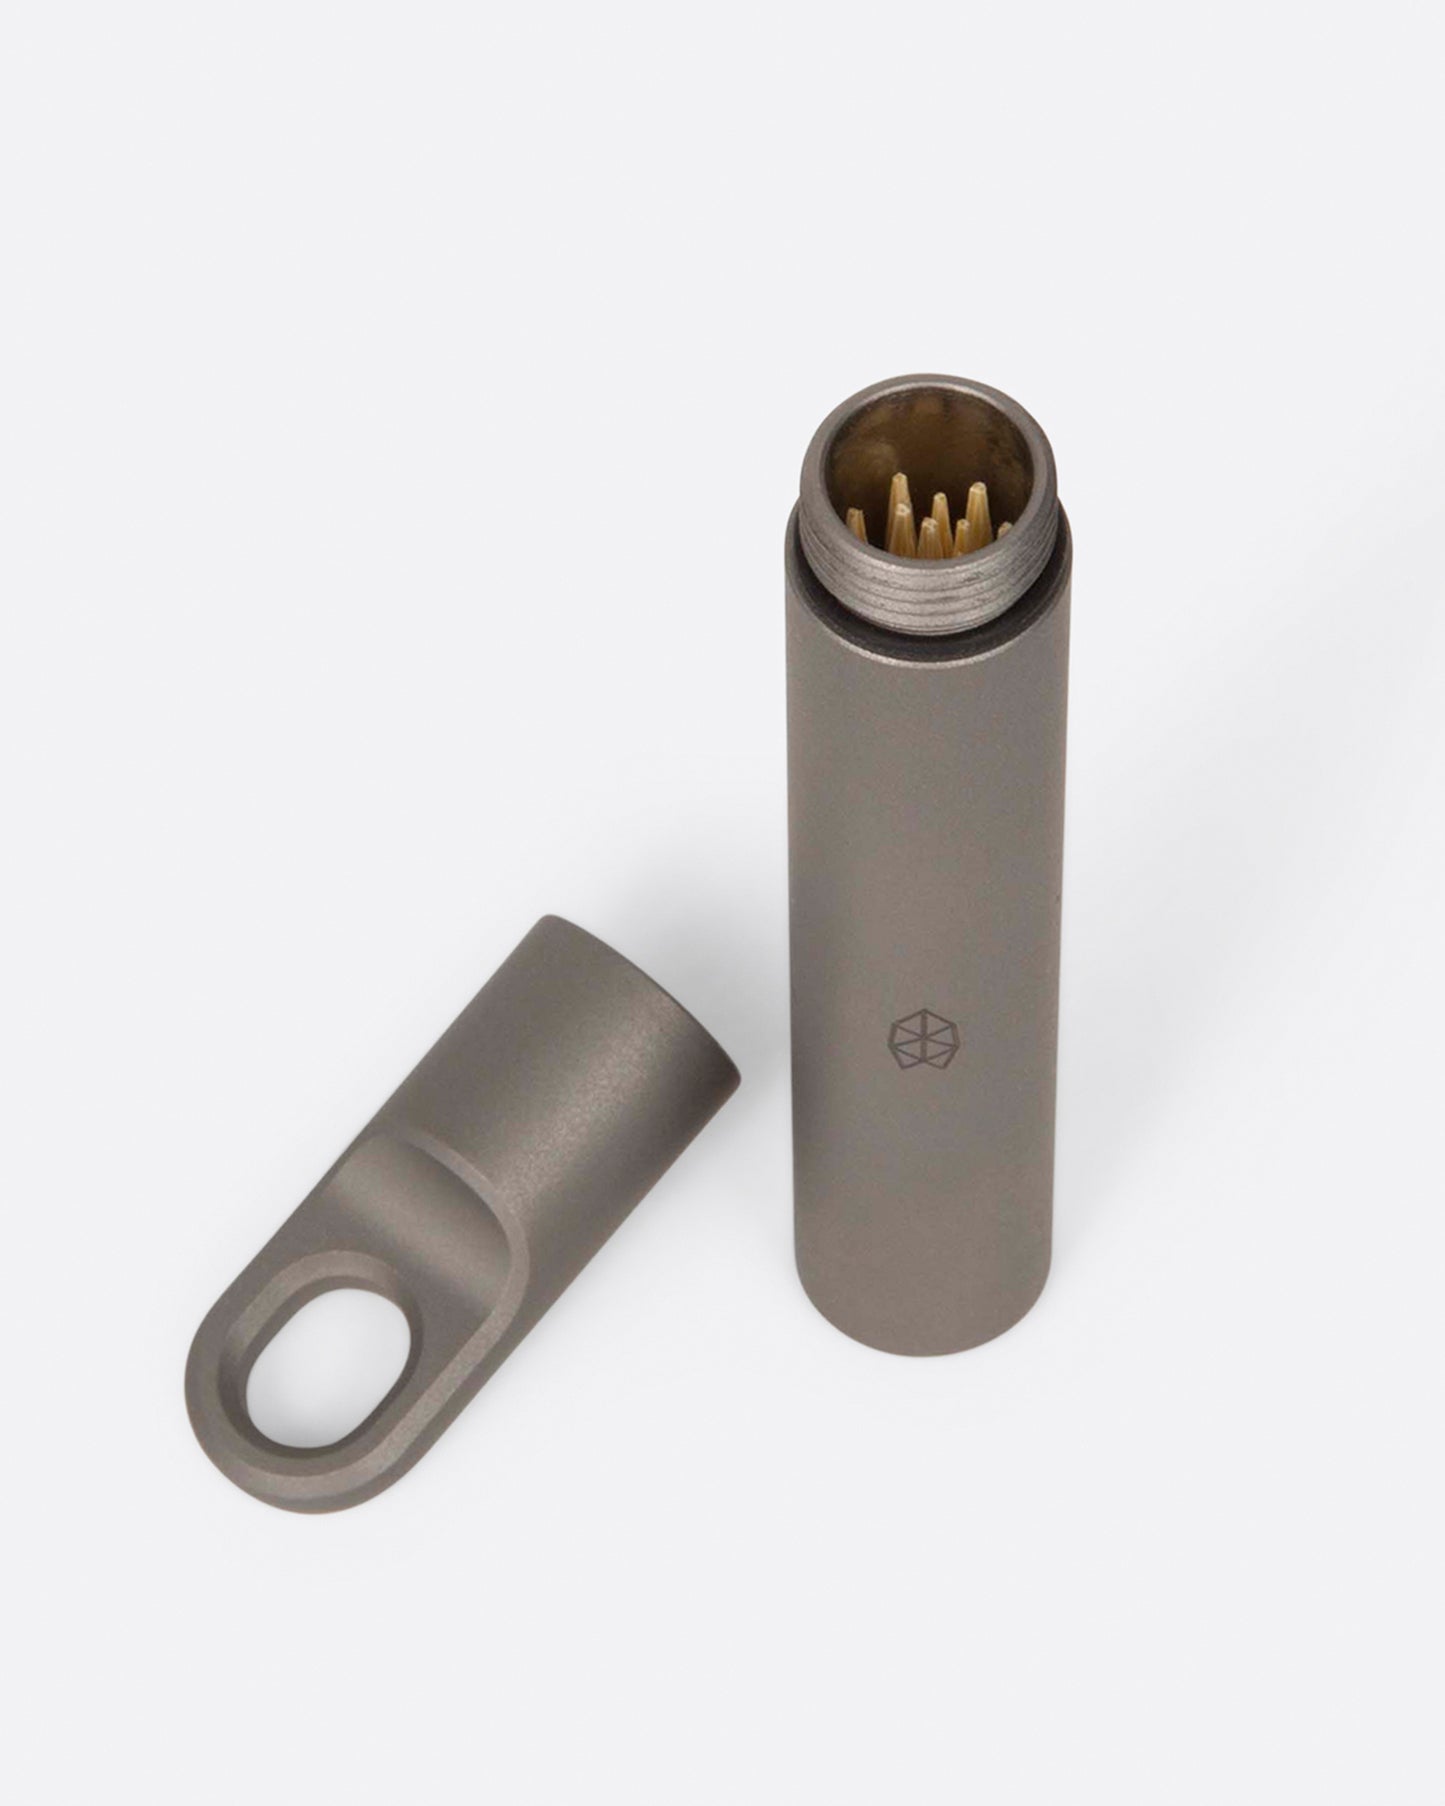 A pocket-size titanium canister shown from above with its lid off.